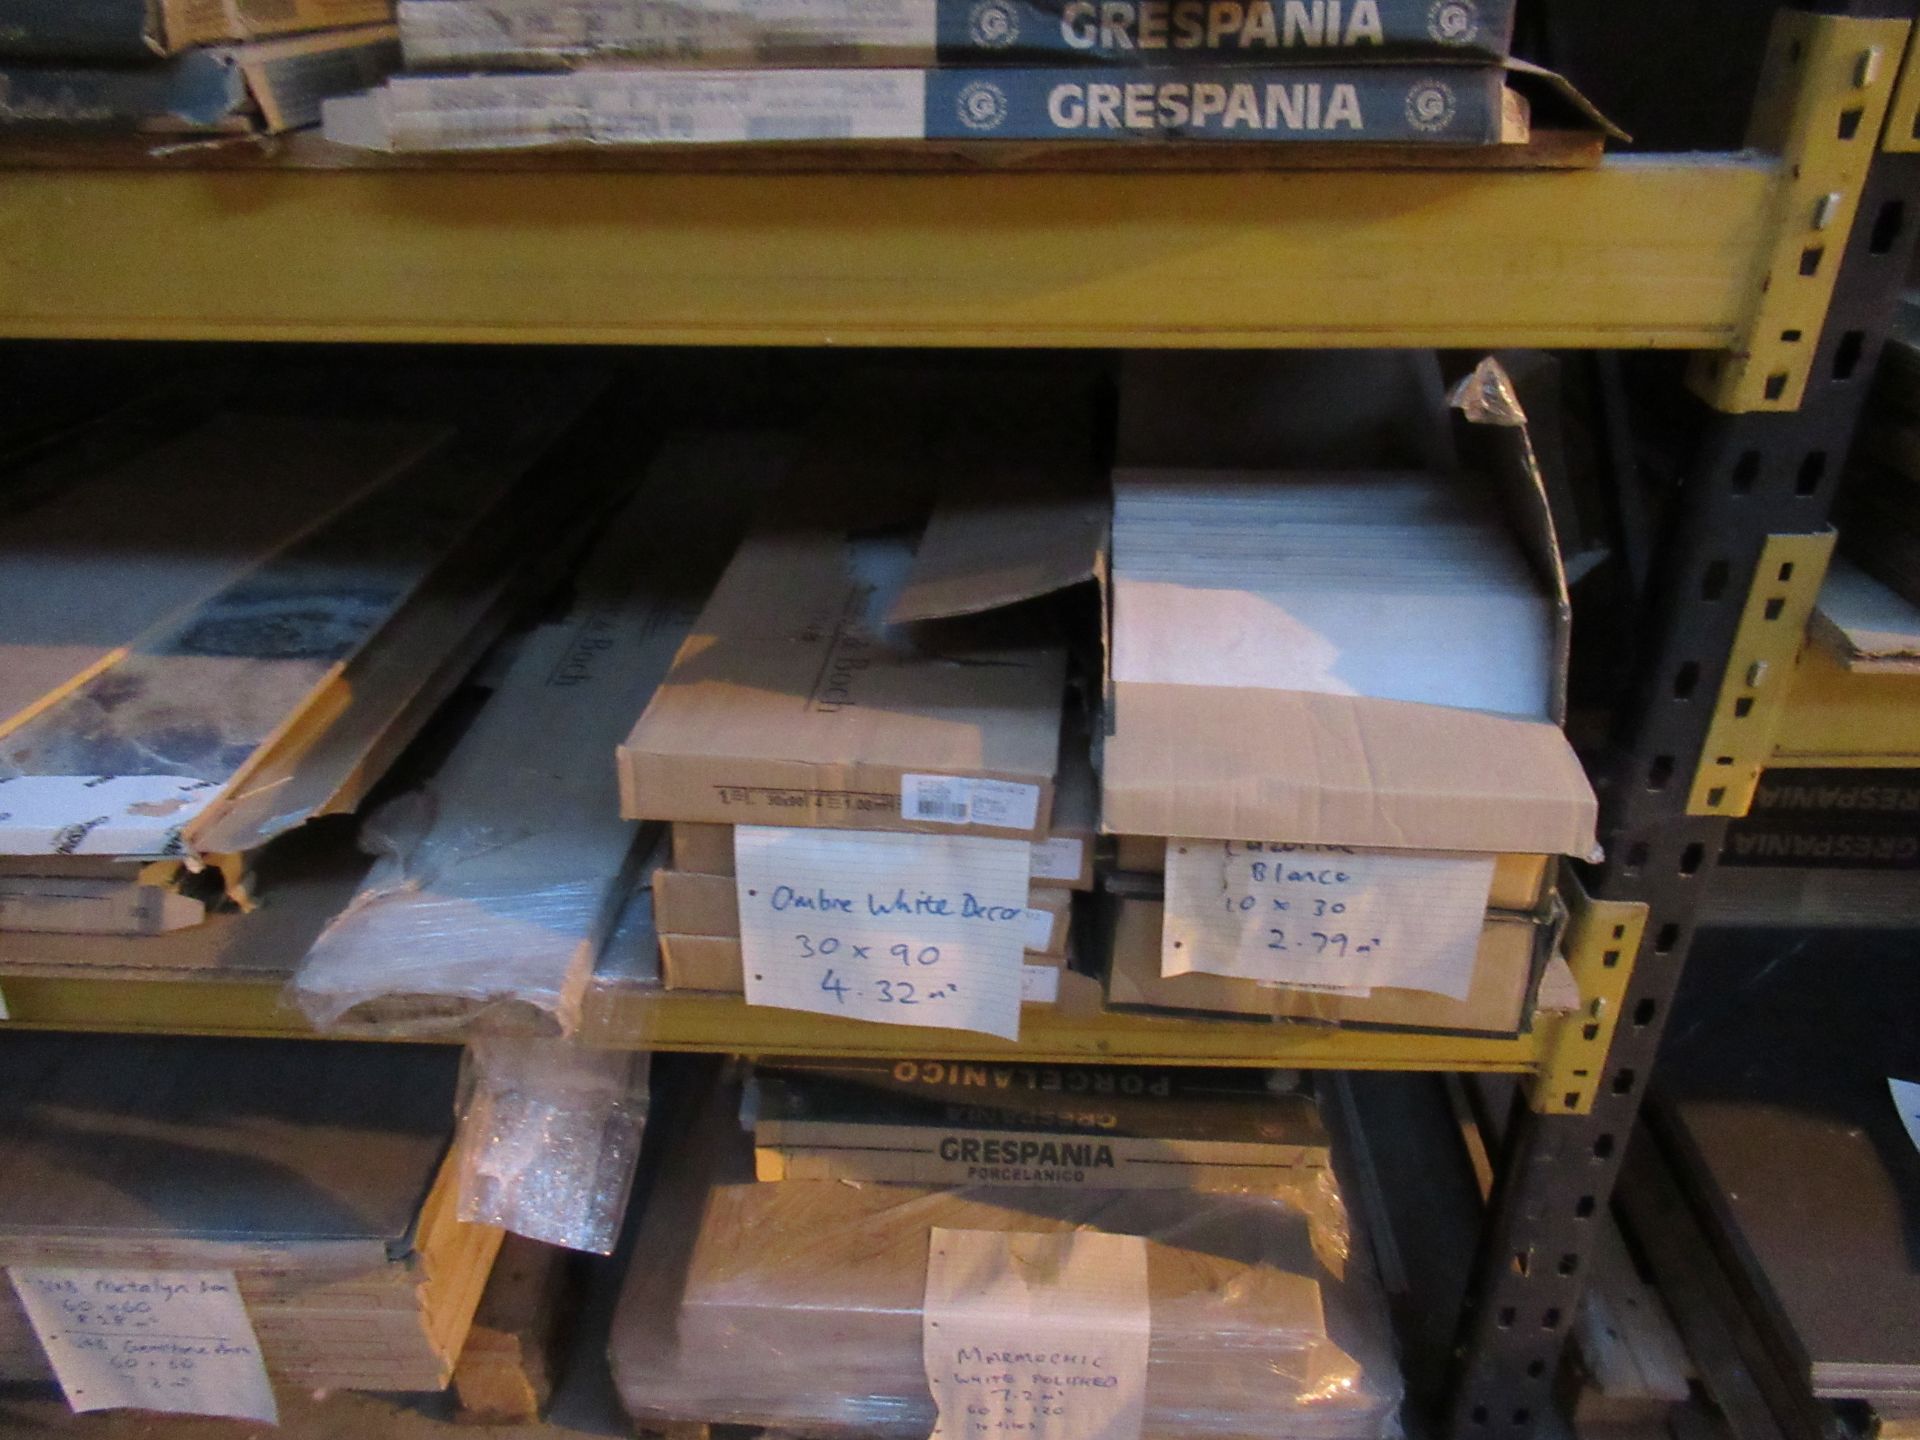 Contents of Pallet Racking Bay inc. A Variety of Grespania Ceramic Tiles - Image 7 of 11